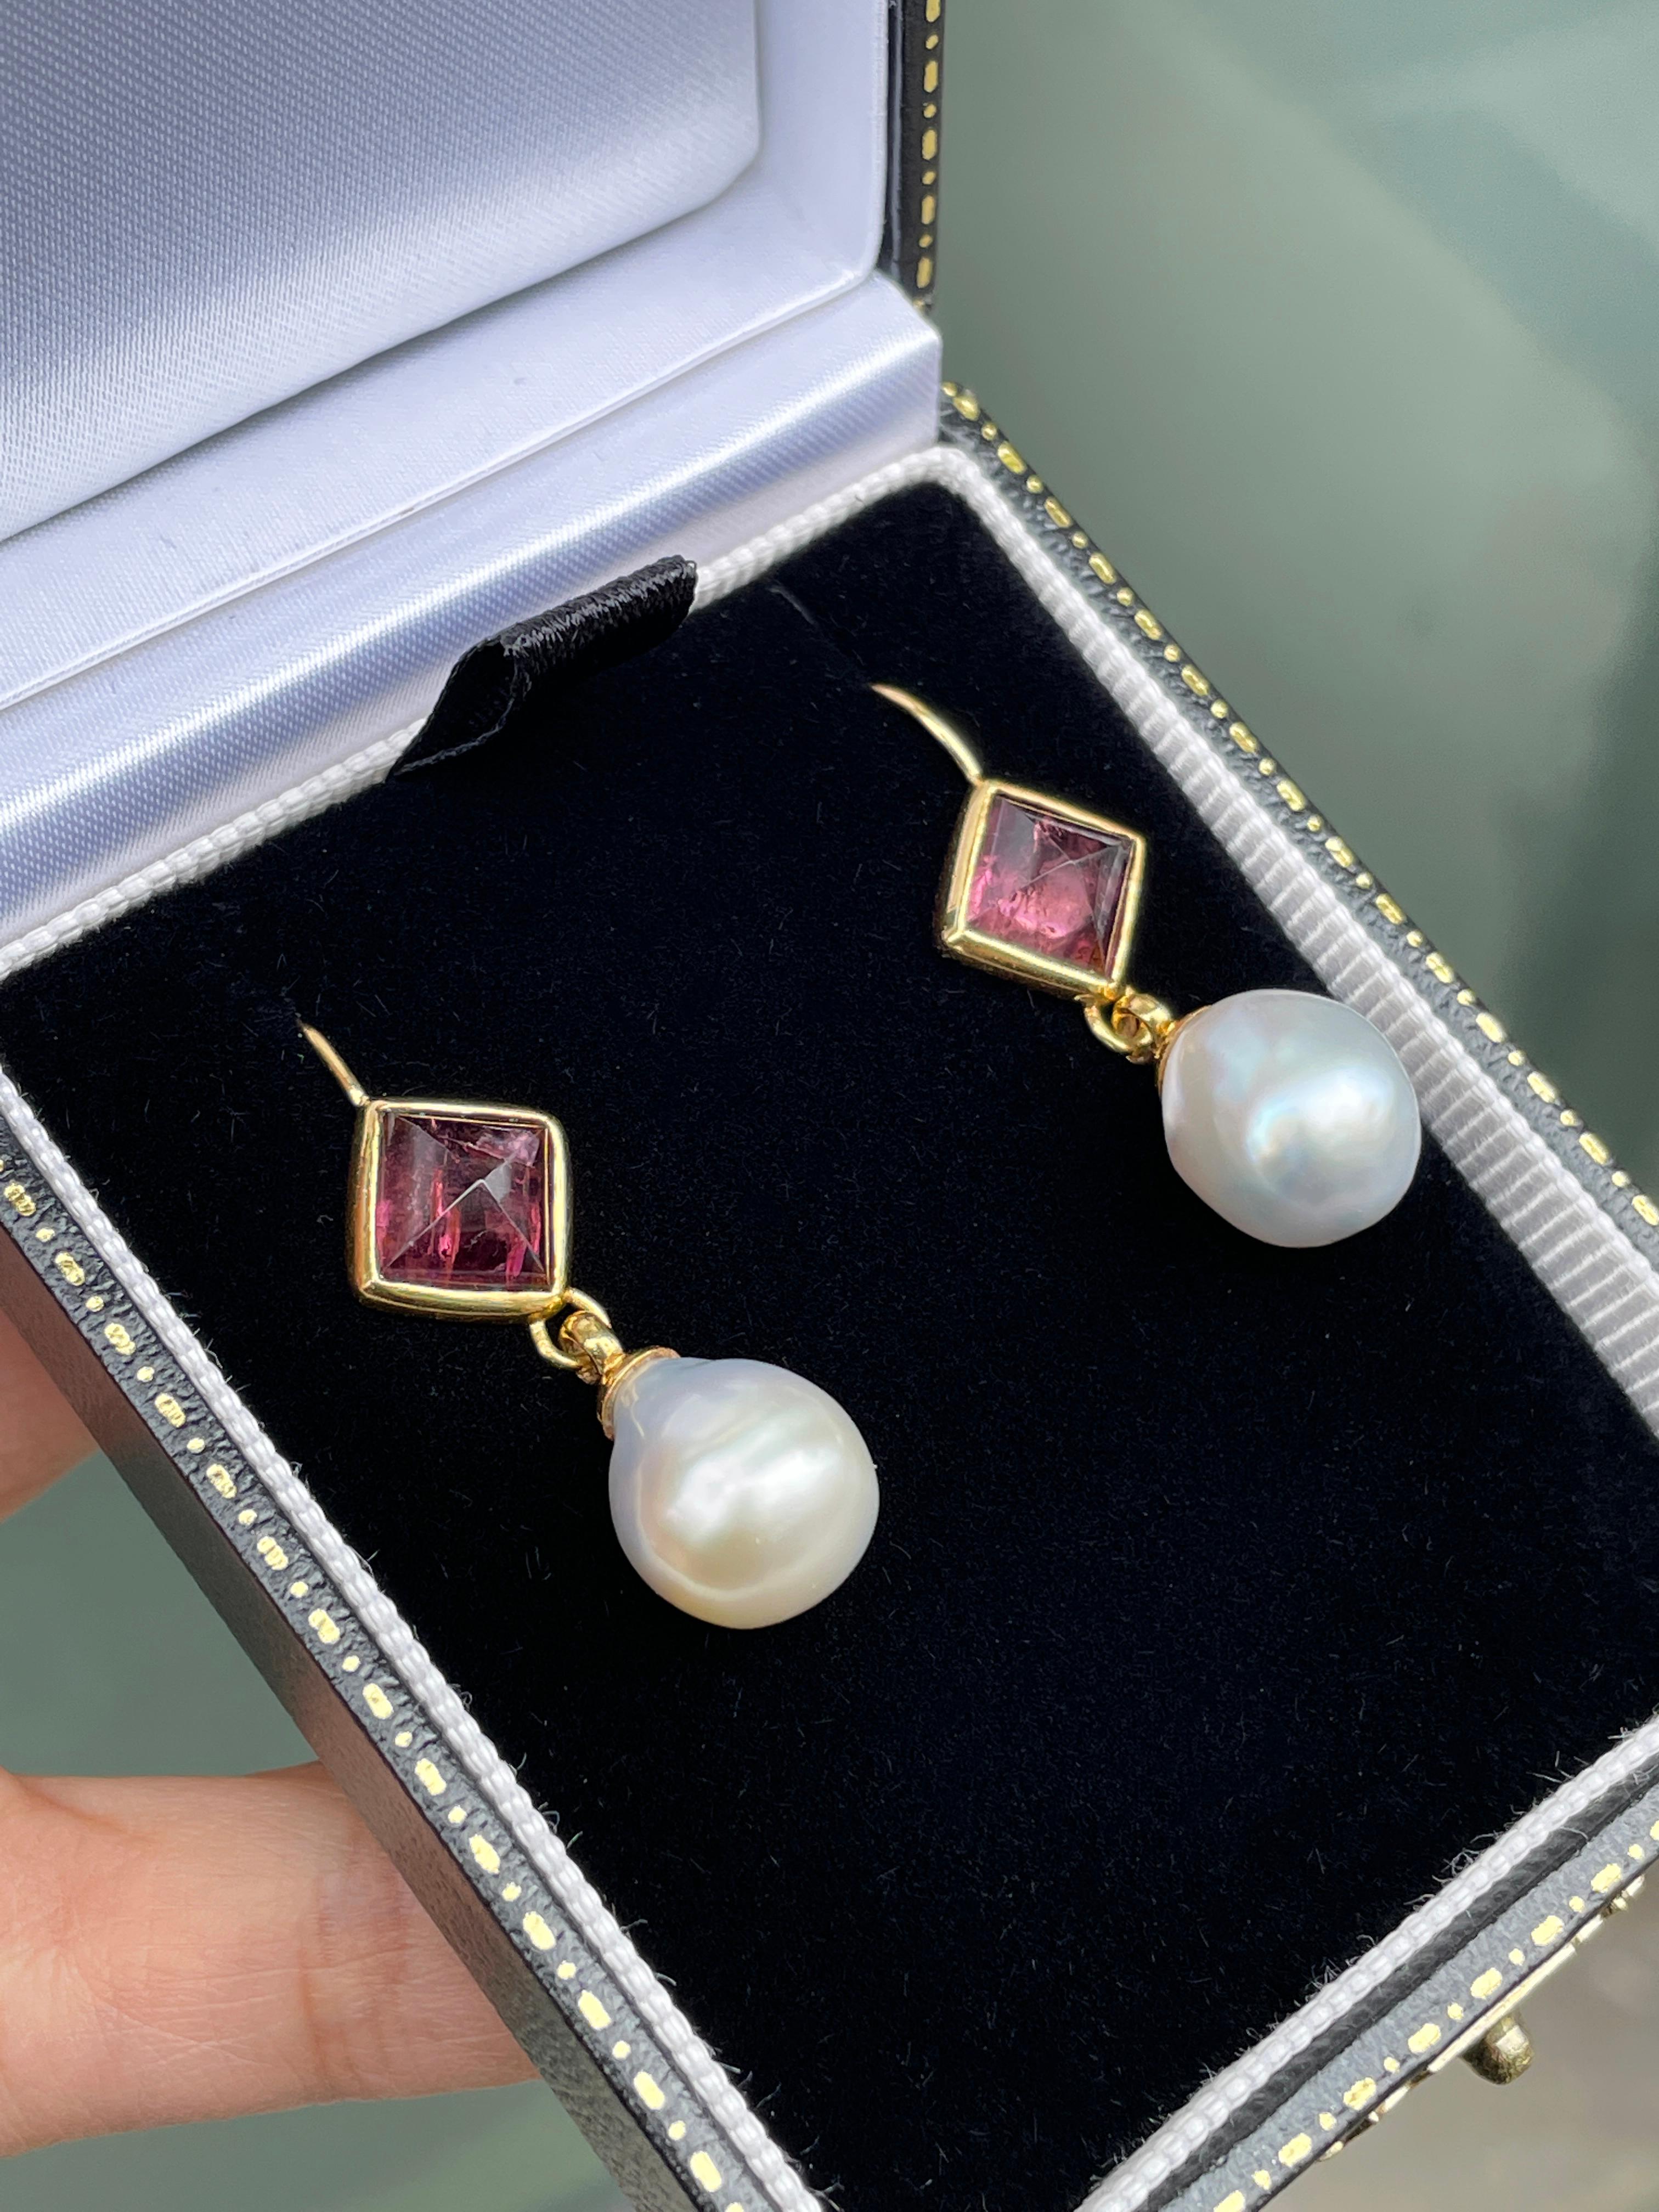 Cabochon 21 Carat South Sea Pearl and Pink Pyramid Cabouchon Tourmaline Drop Earrings For Sale